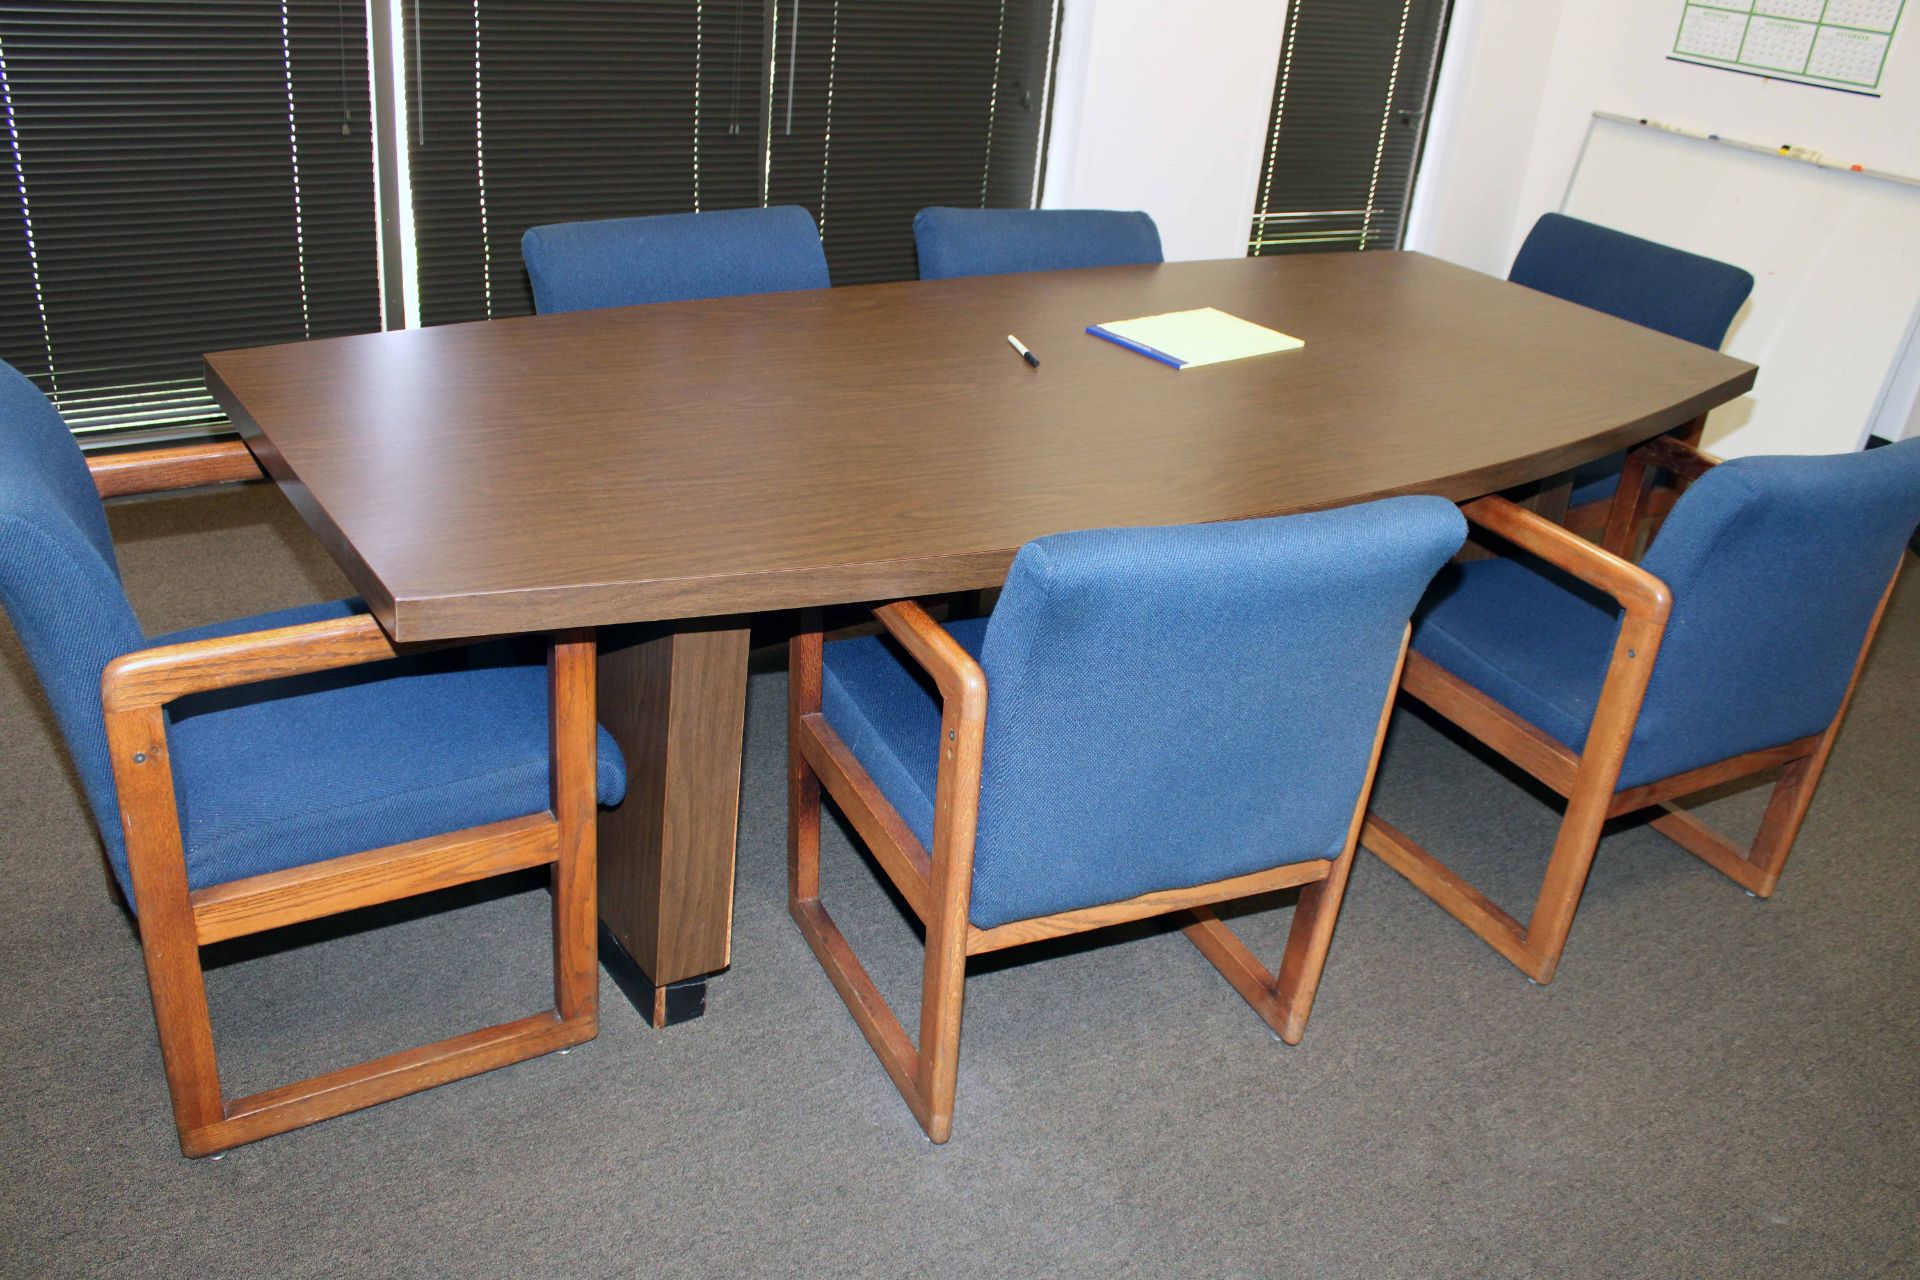 LOT CONSISTING OF: conference table, chairs & couch